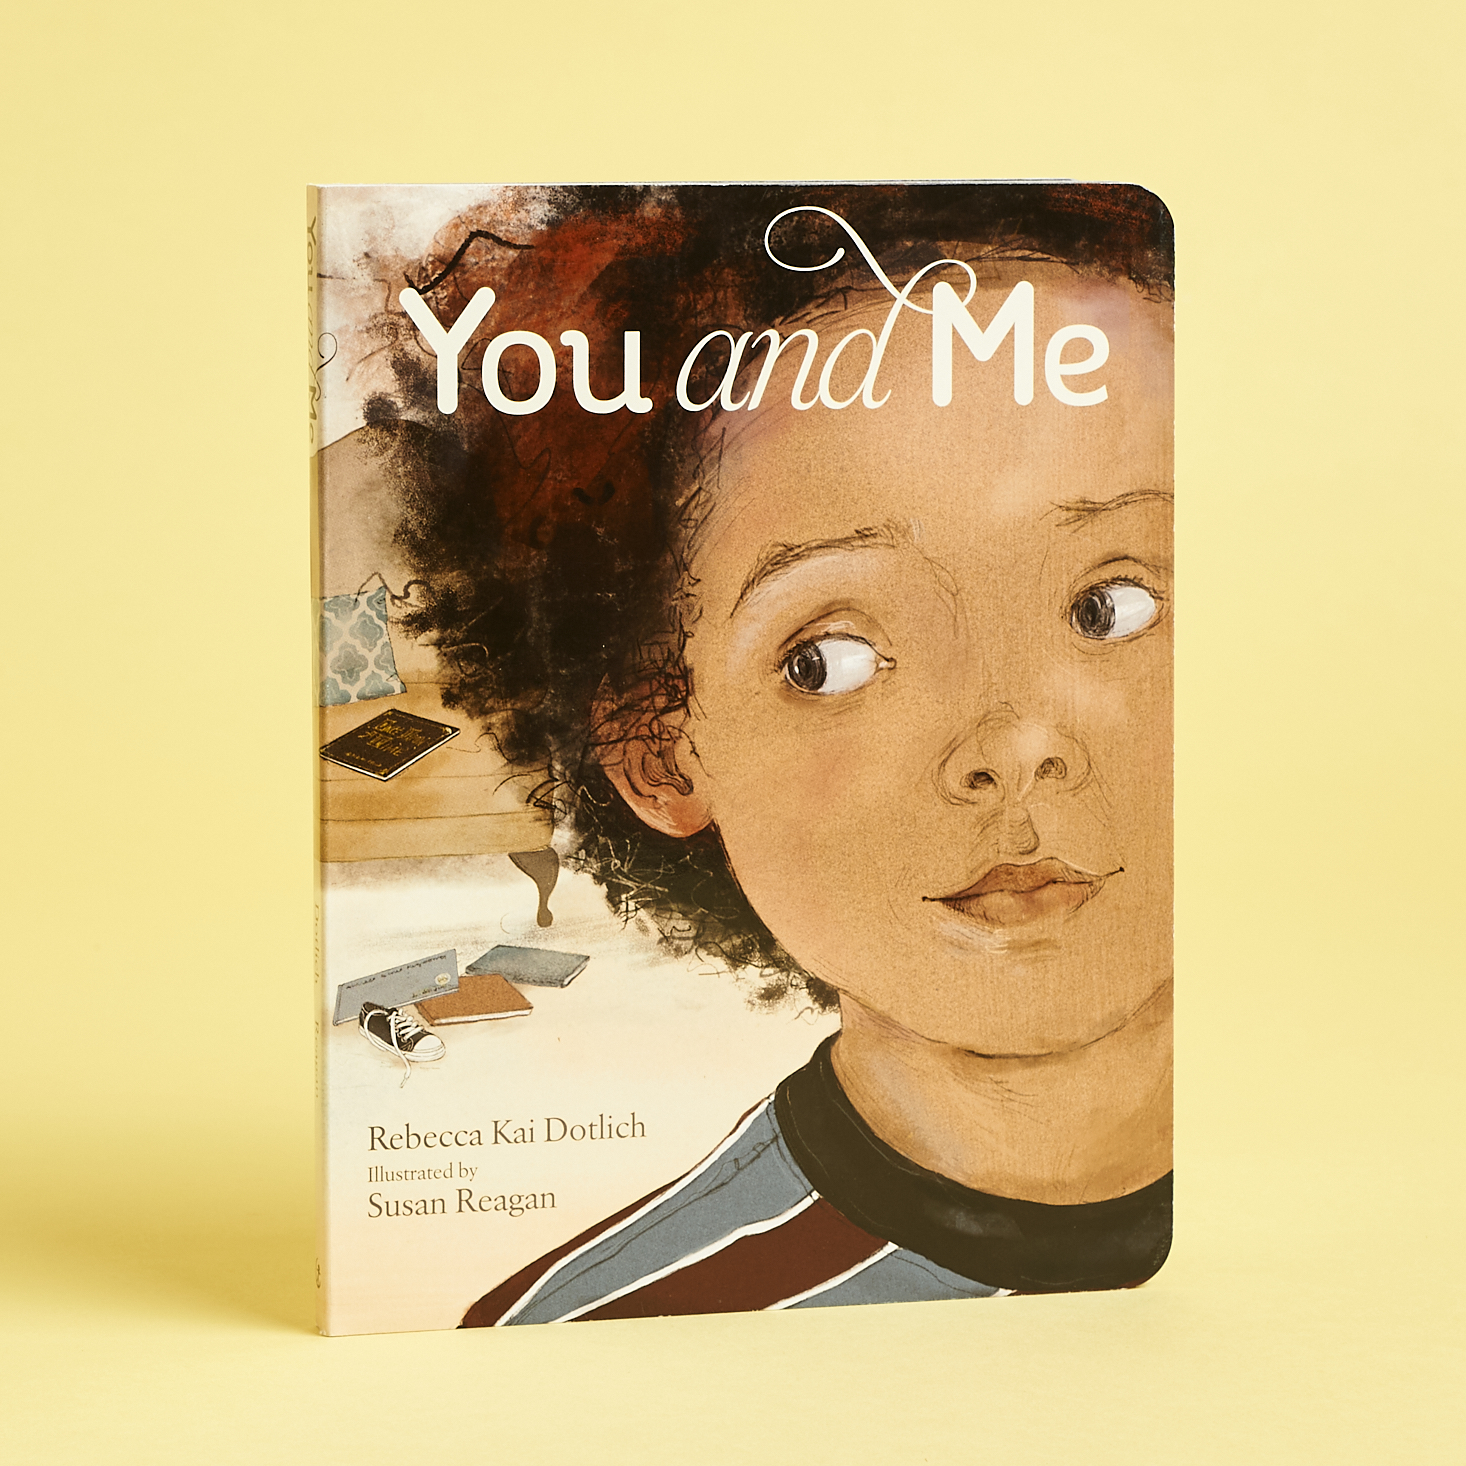 Little Feminist 0-3 September 2020 you and me book cover